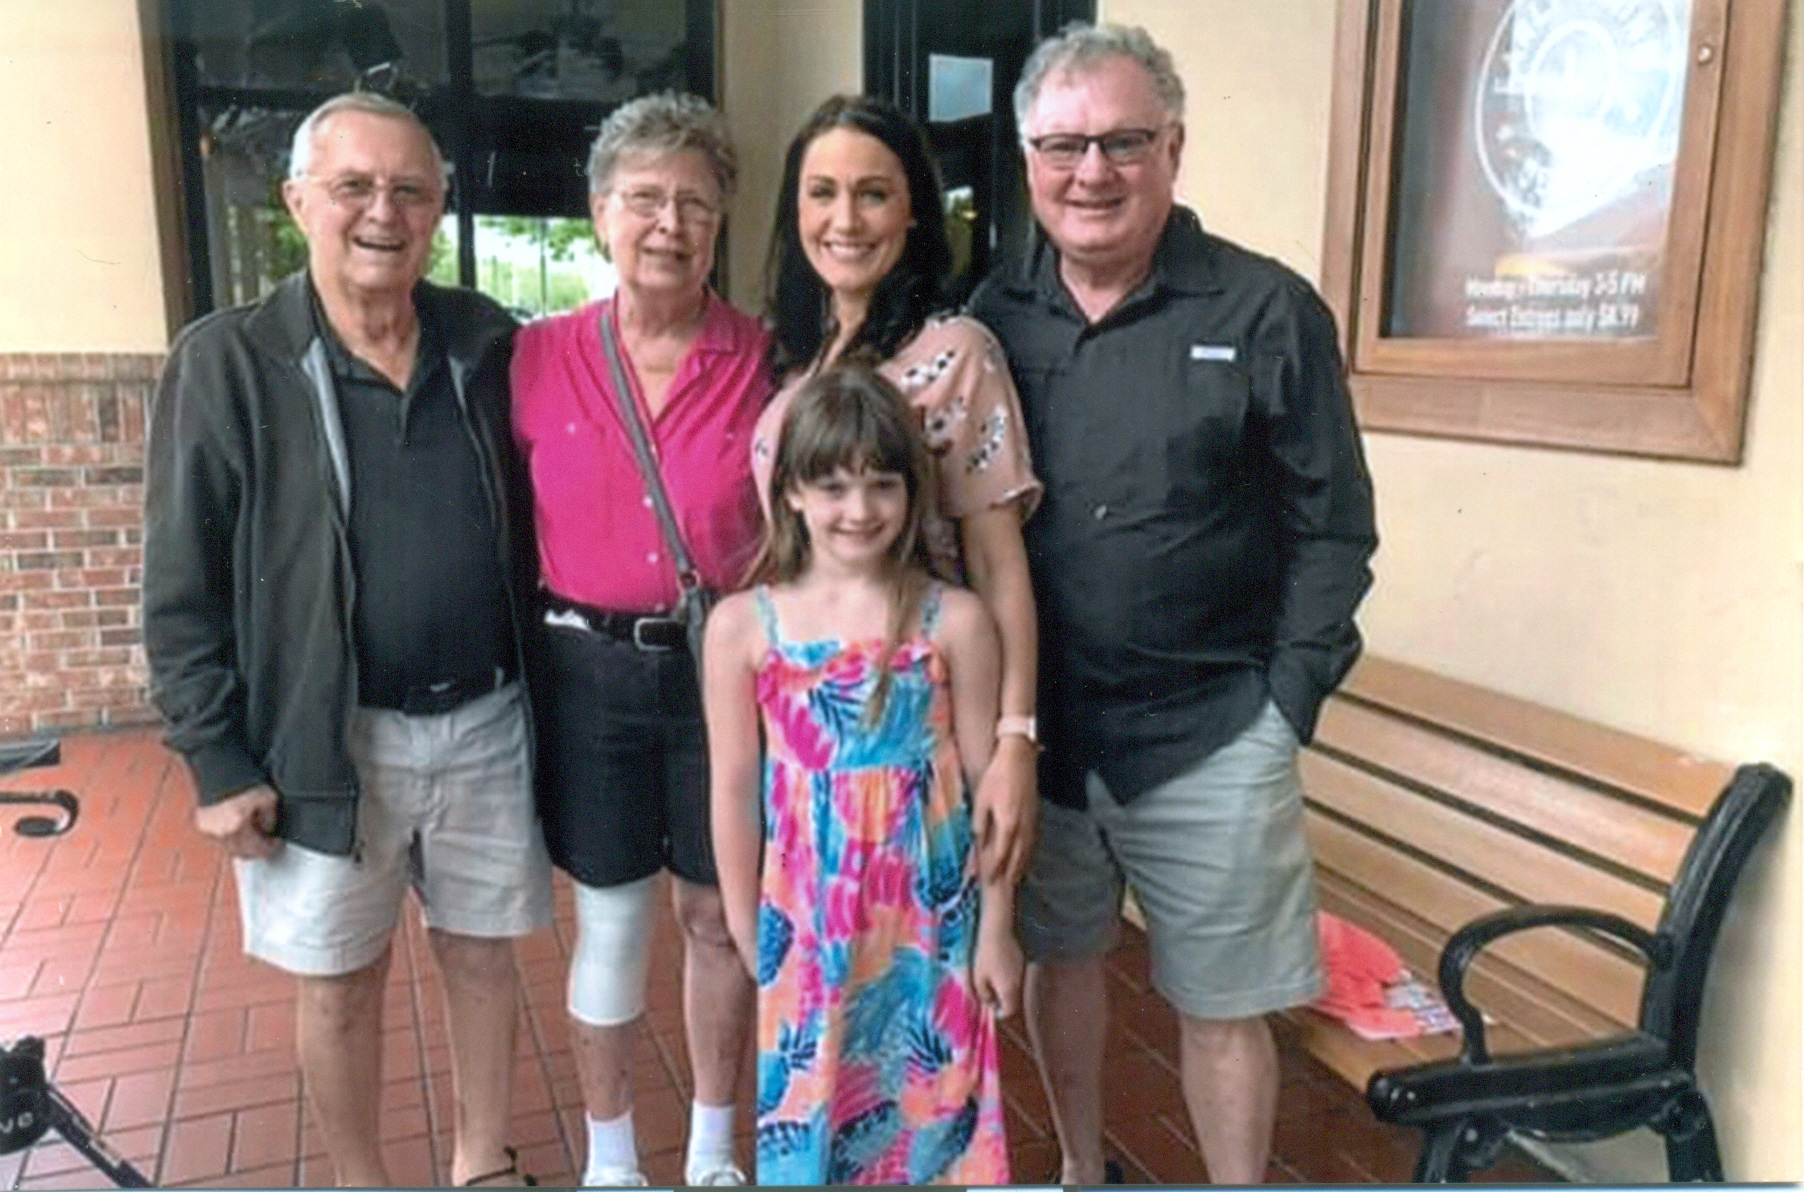 Emily takes Judy's granddaughter to meet Karen and Cliff. Emily's Dad, Pat, also joined in.